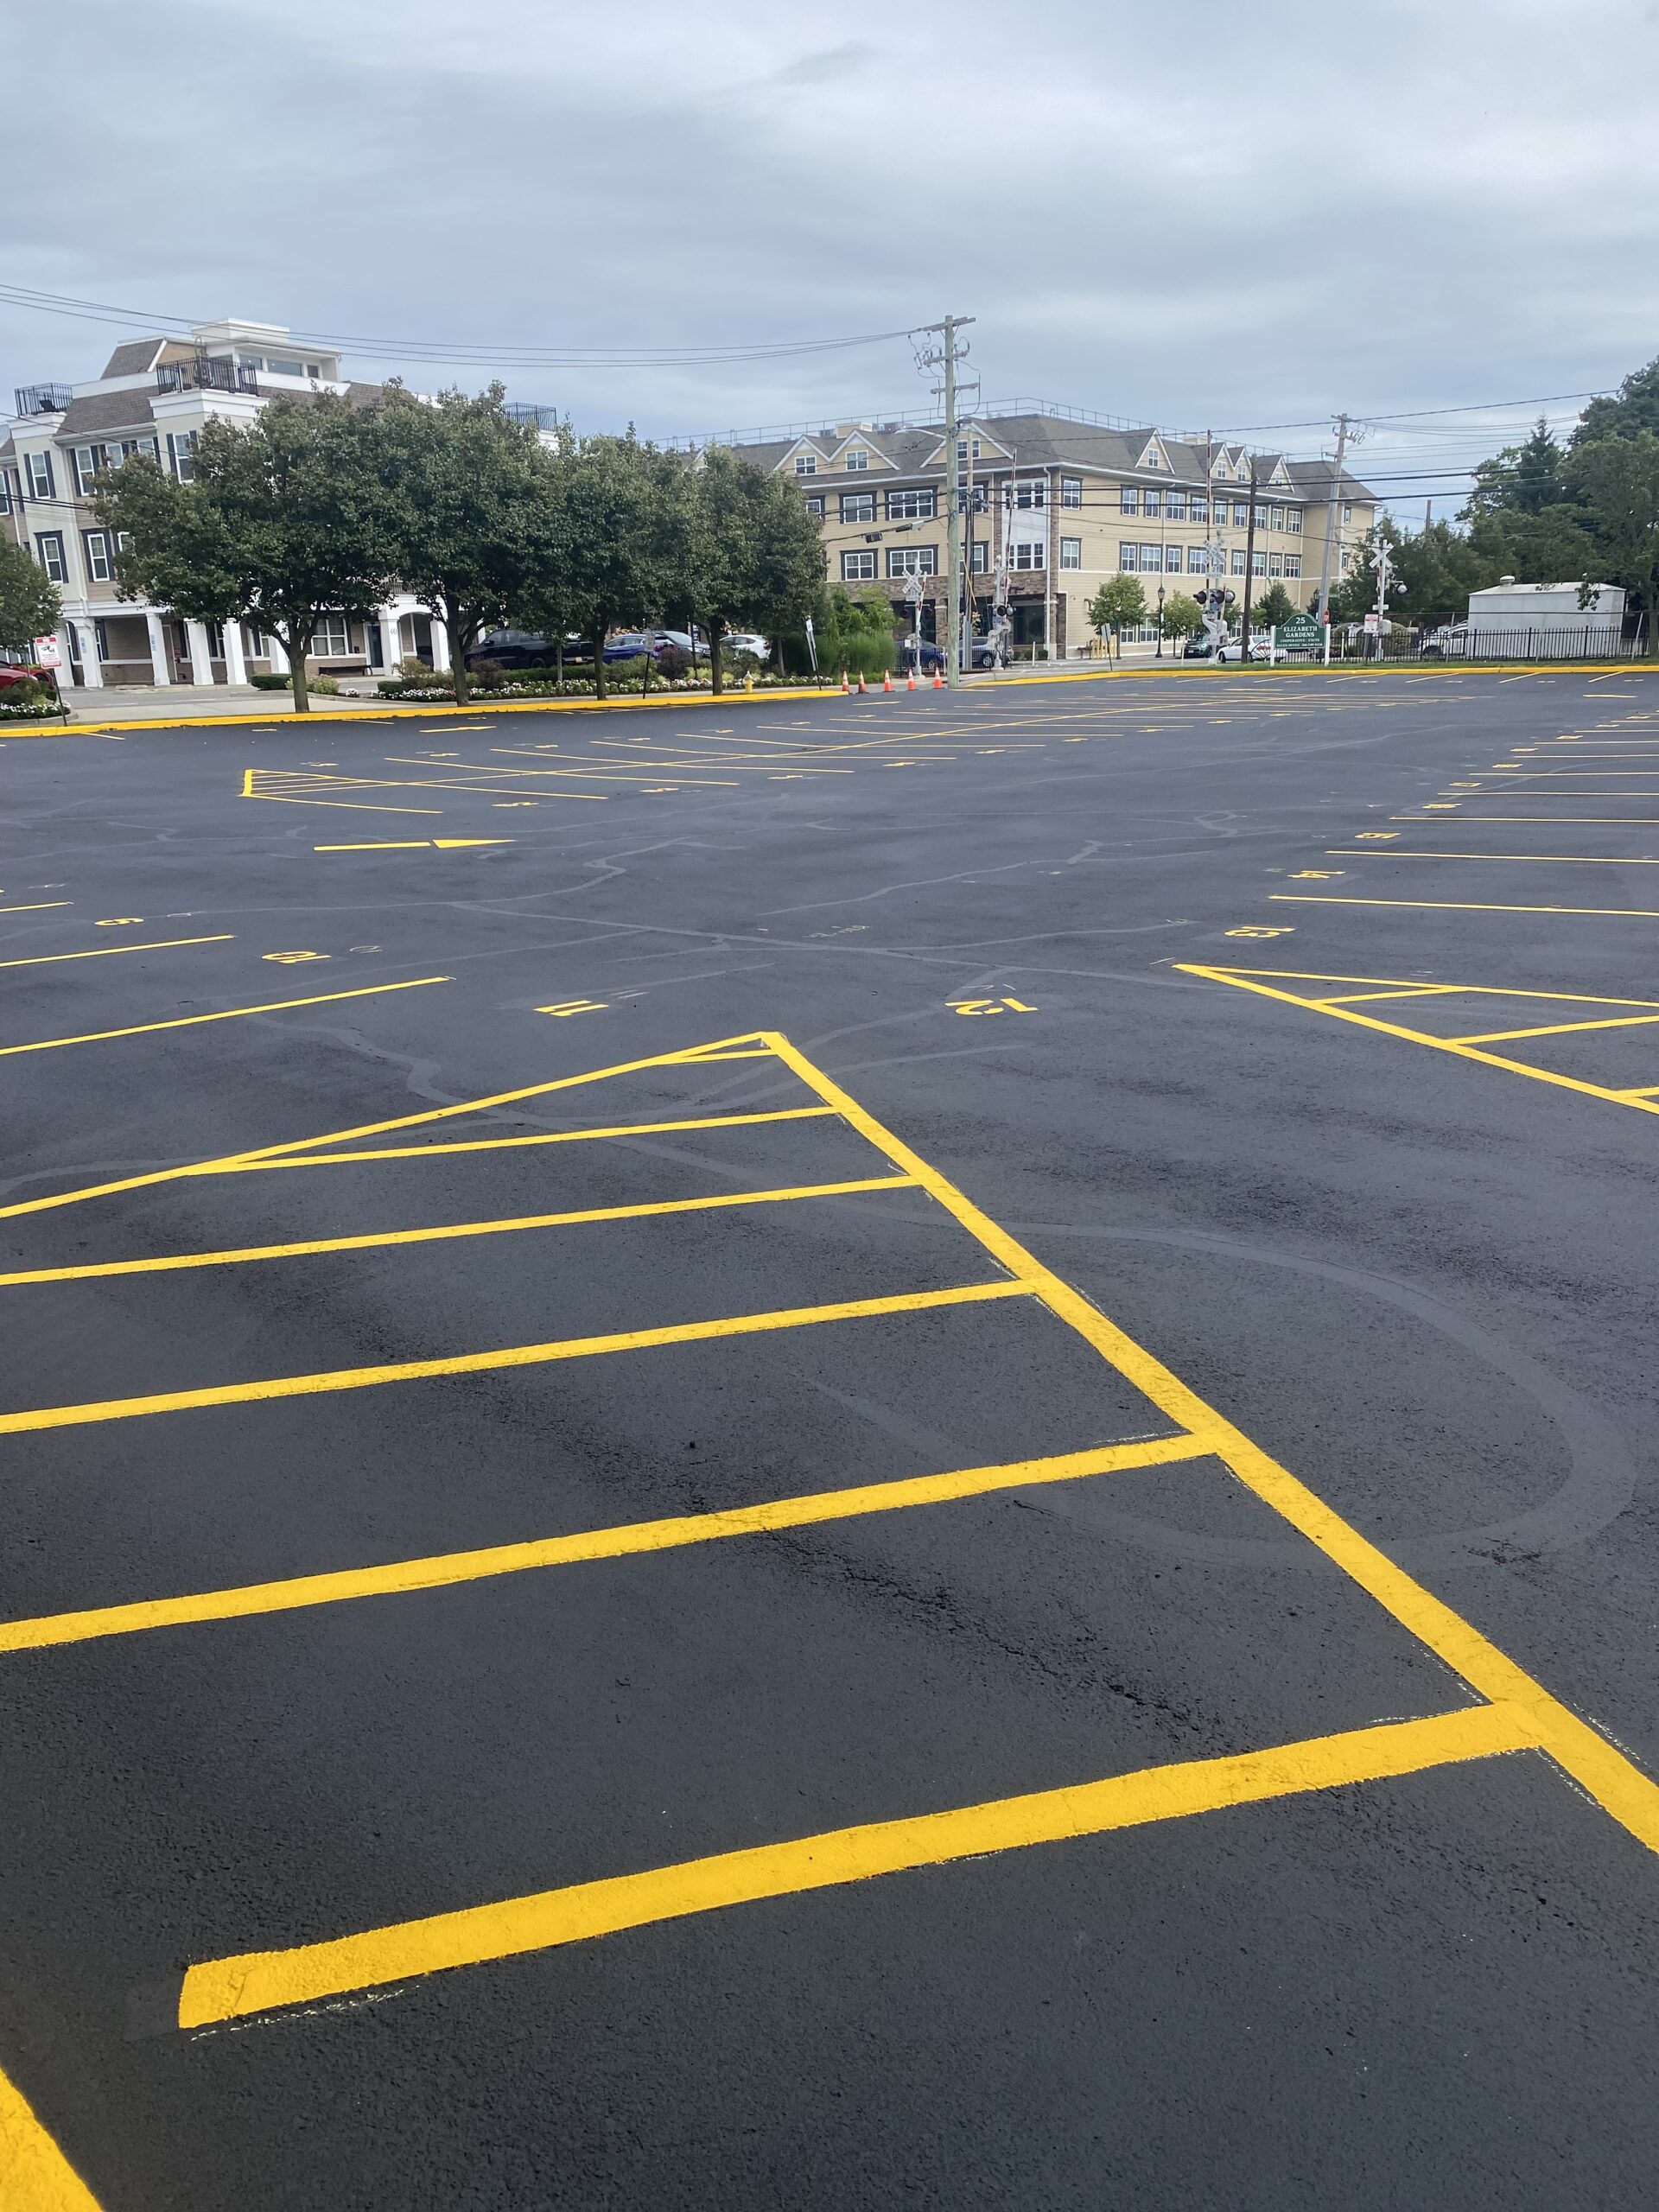 How Much Does it Cost to Pave a Parking Lot?